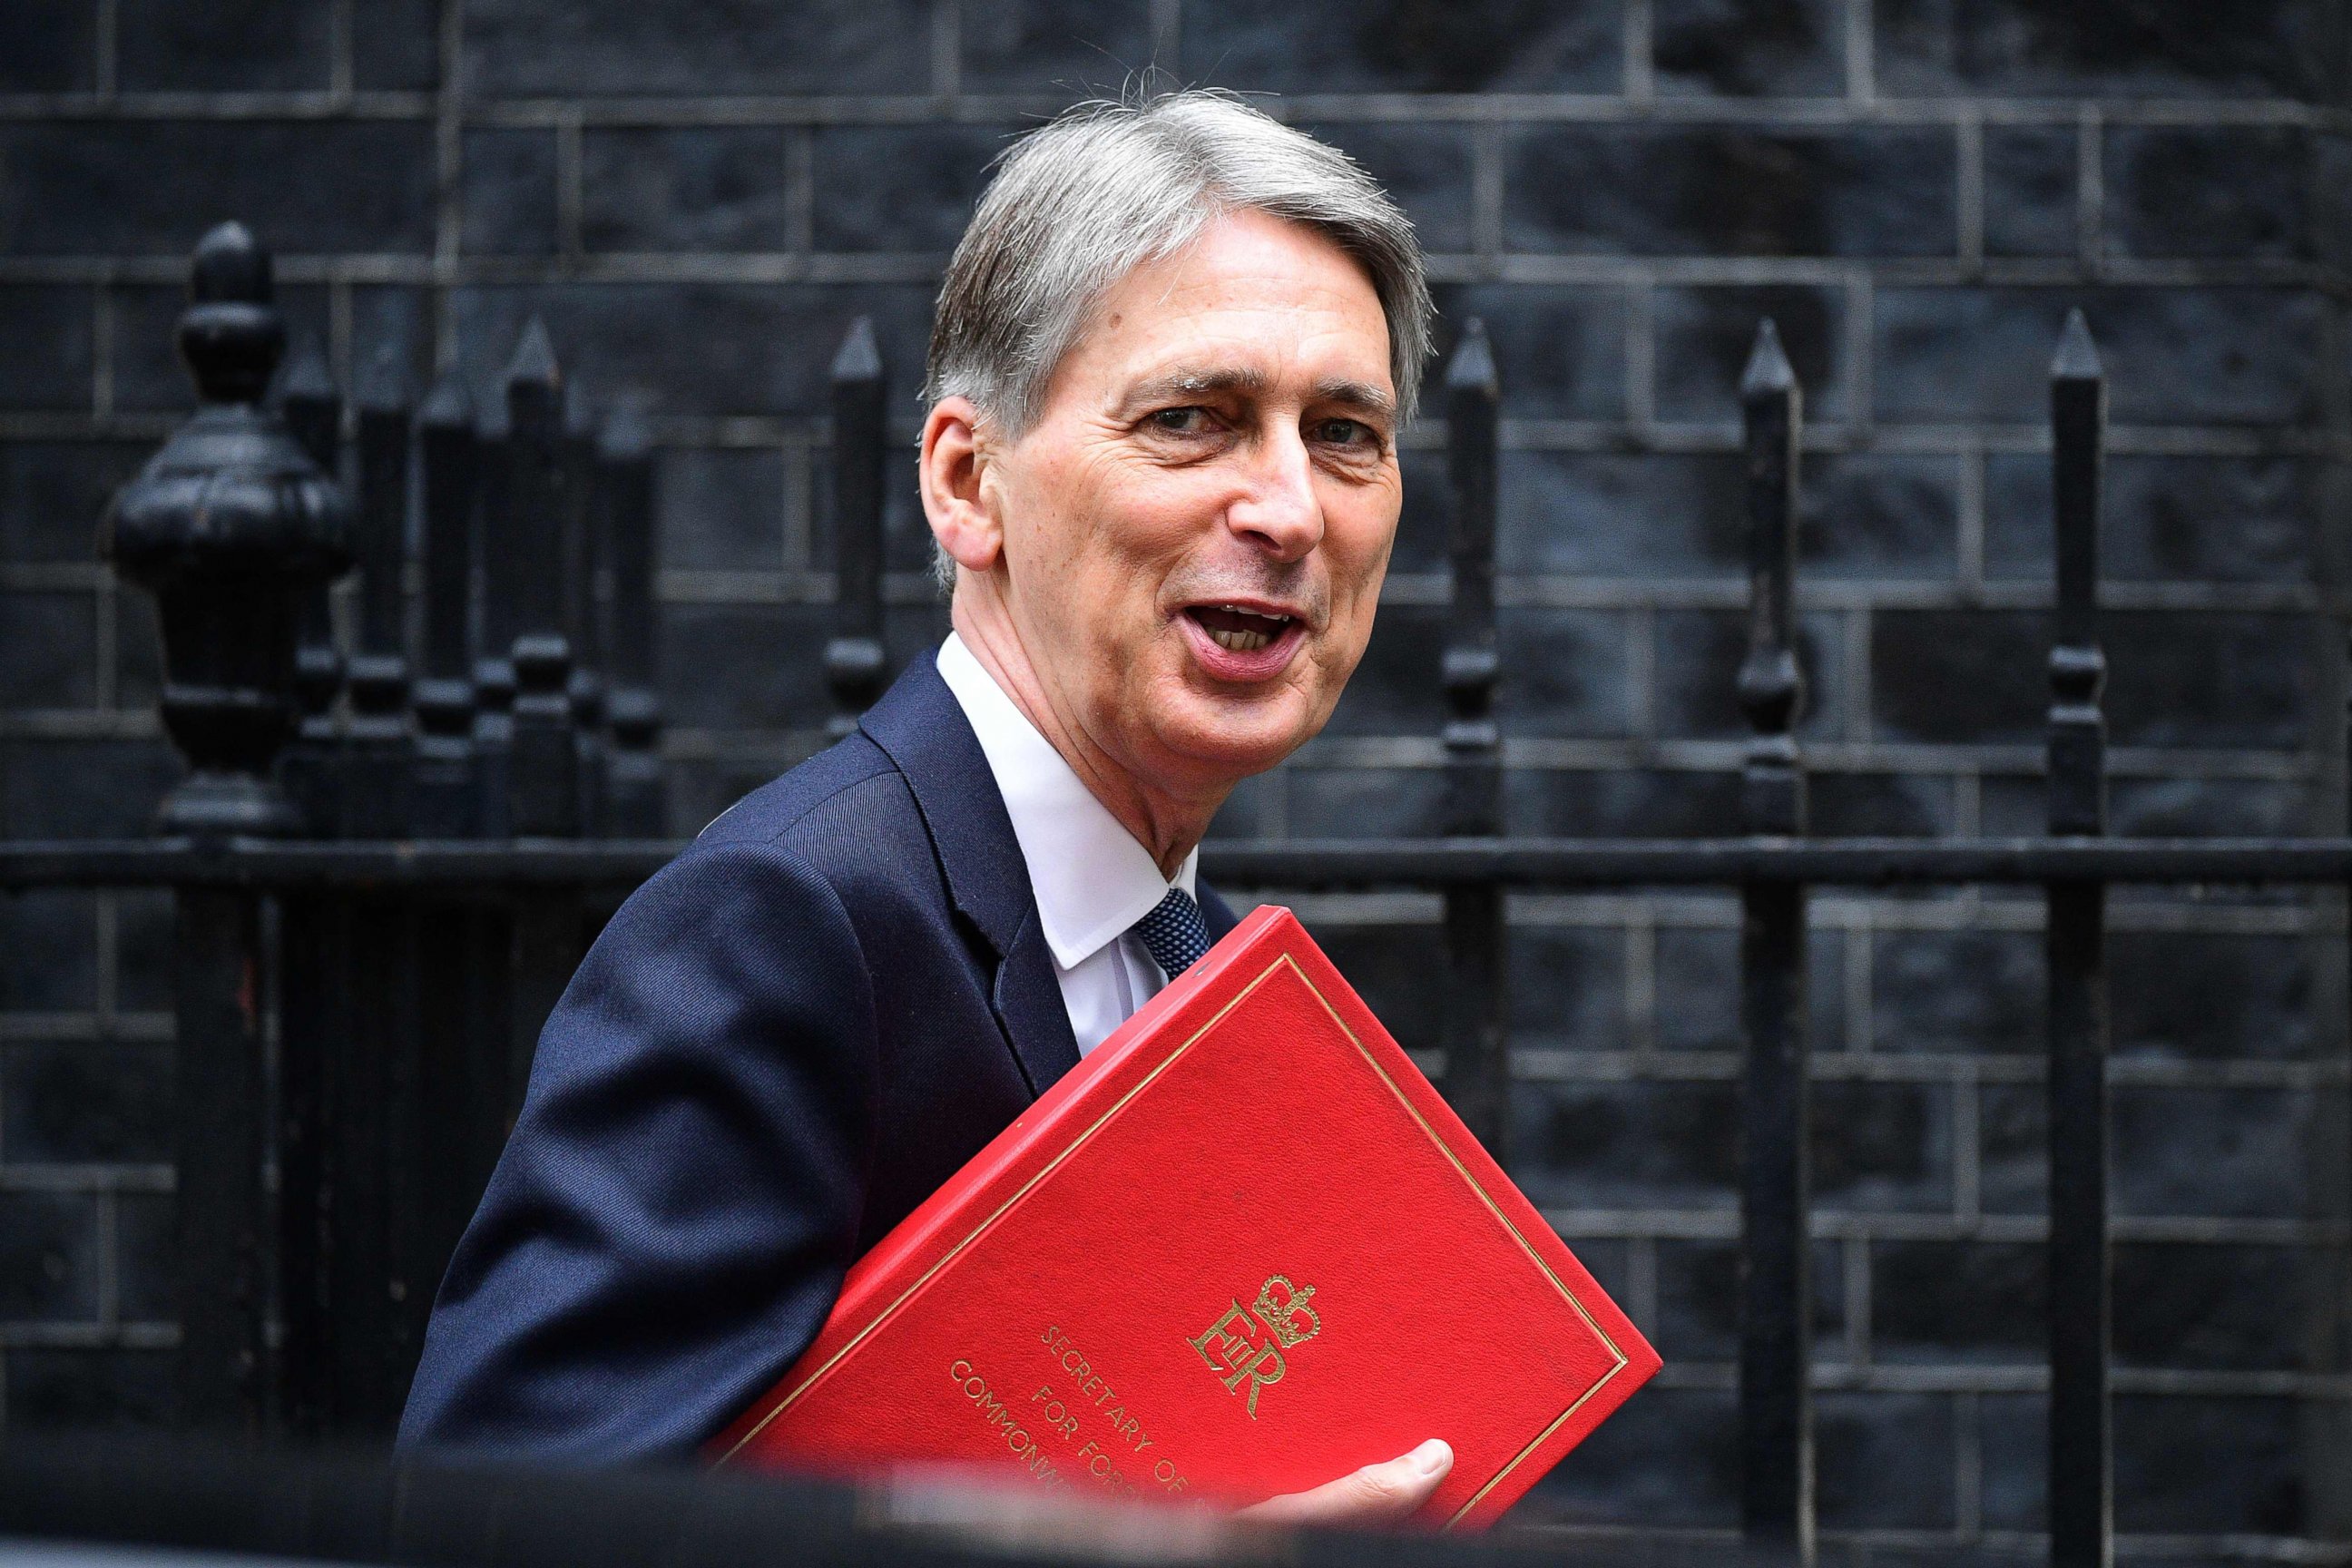 PHOTO: British Foreign Secretary Philip Hammond arrives to attend a cabinet meeting at 10 Downing Street in London, June 27, 2016.